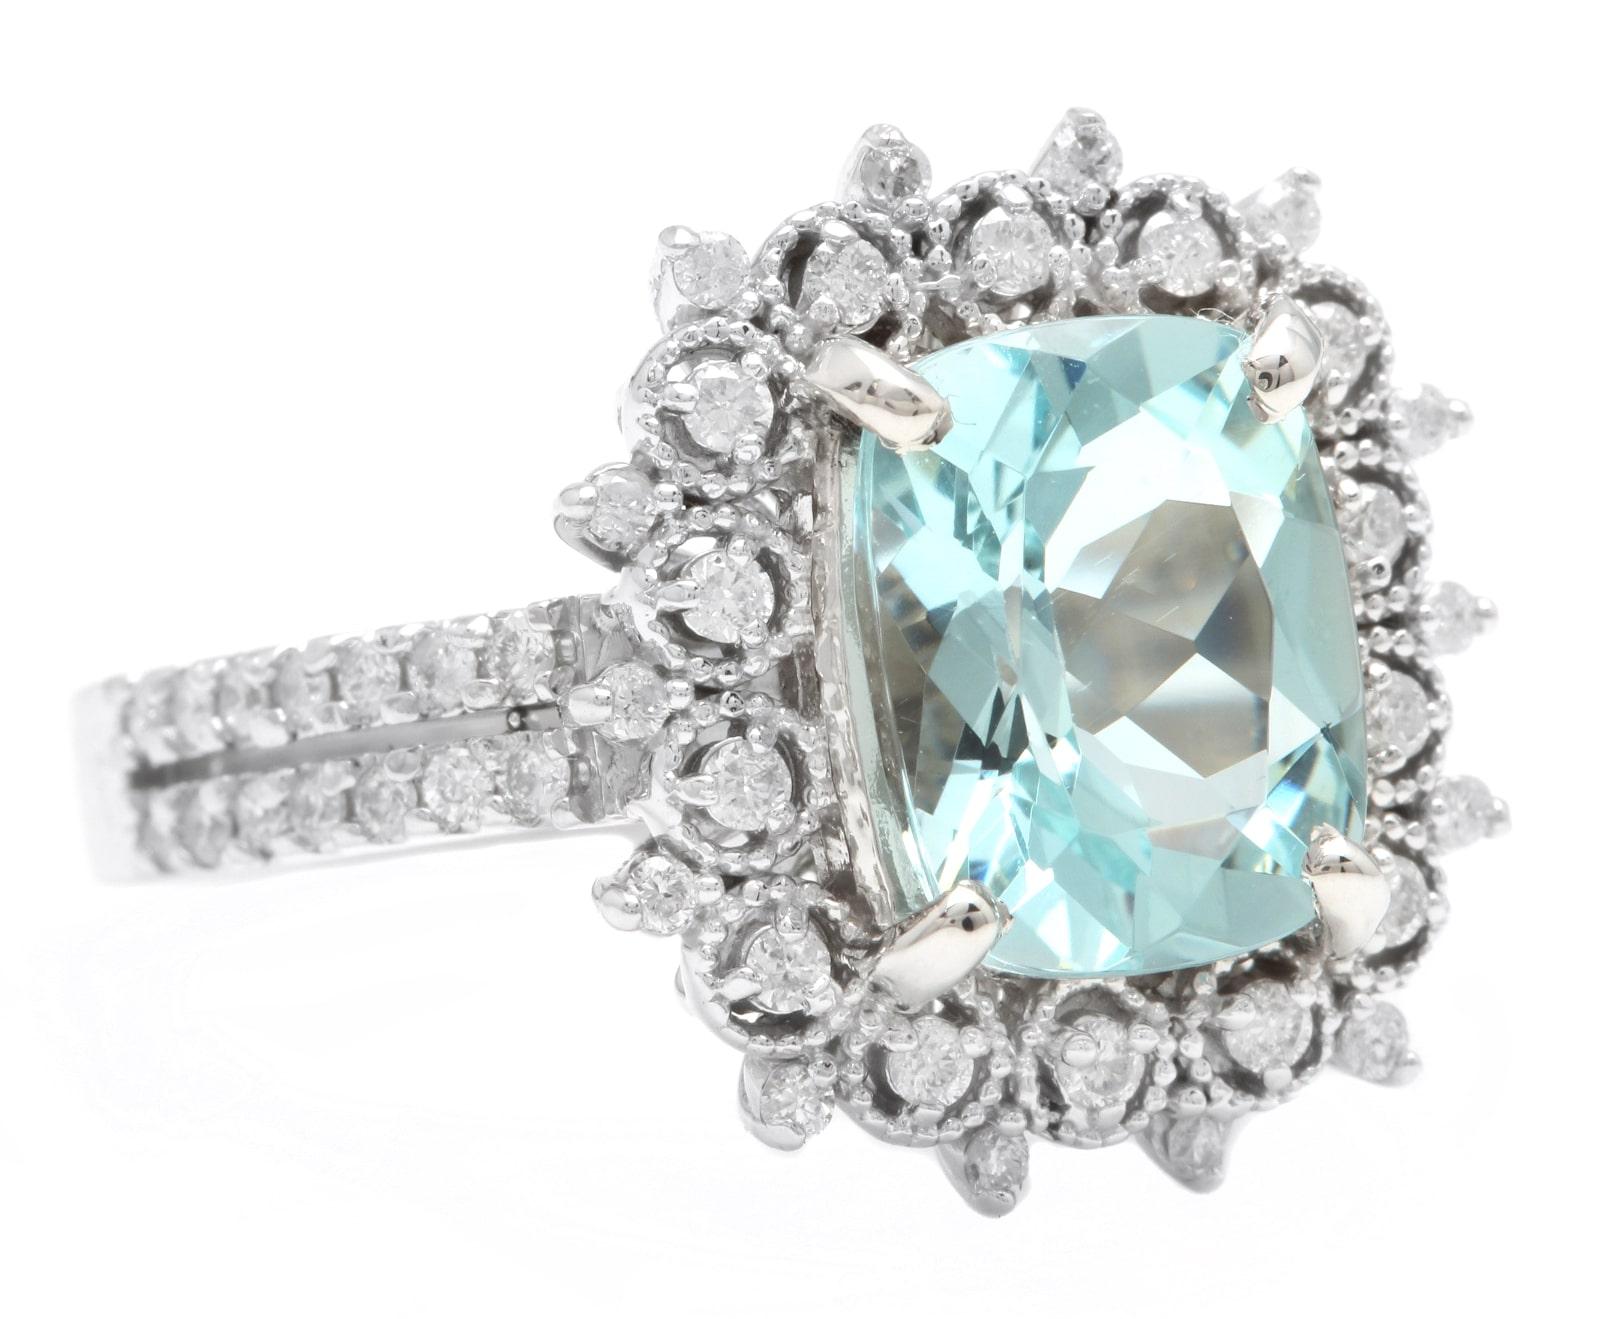 3.50 Carats Natural Aquamarine and Diamond 14K Solid White Gold Ring

Suggested Replacement Value: Approx. $5,500.00

Total Natural Cushion Aquamarine Weights: Approx. 3.00 Carats 

Aquamarine Measures: Approx. 10.00 x 8.00mm

Aquamarine Treatment: